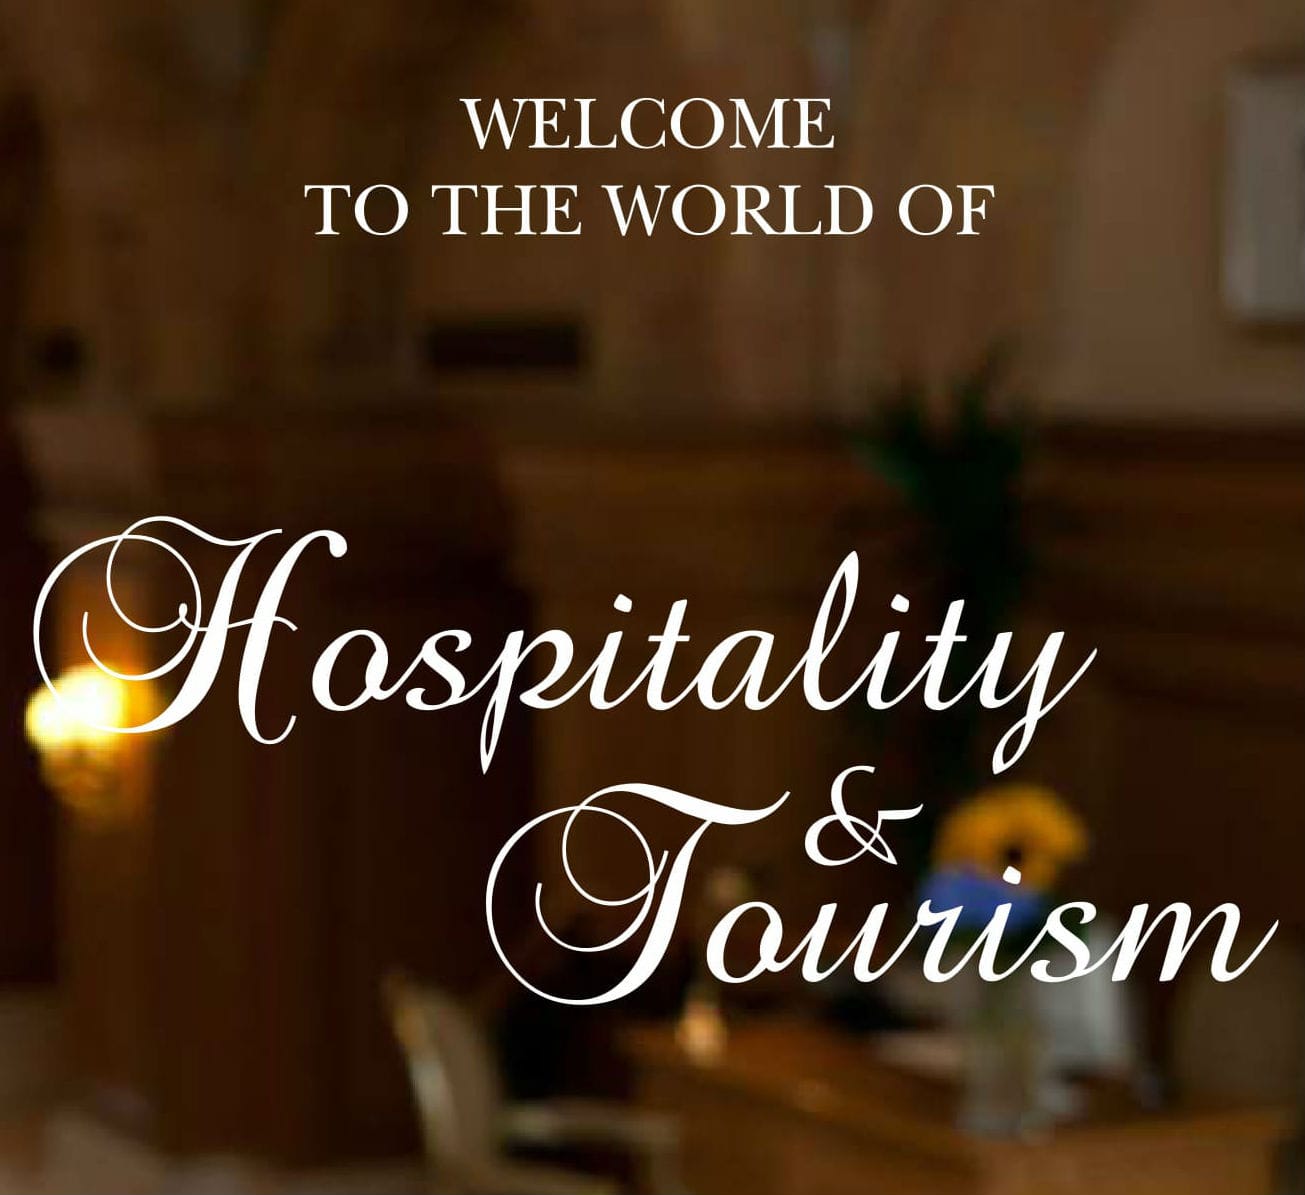 tourism and hospitality references